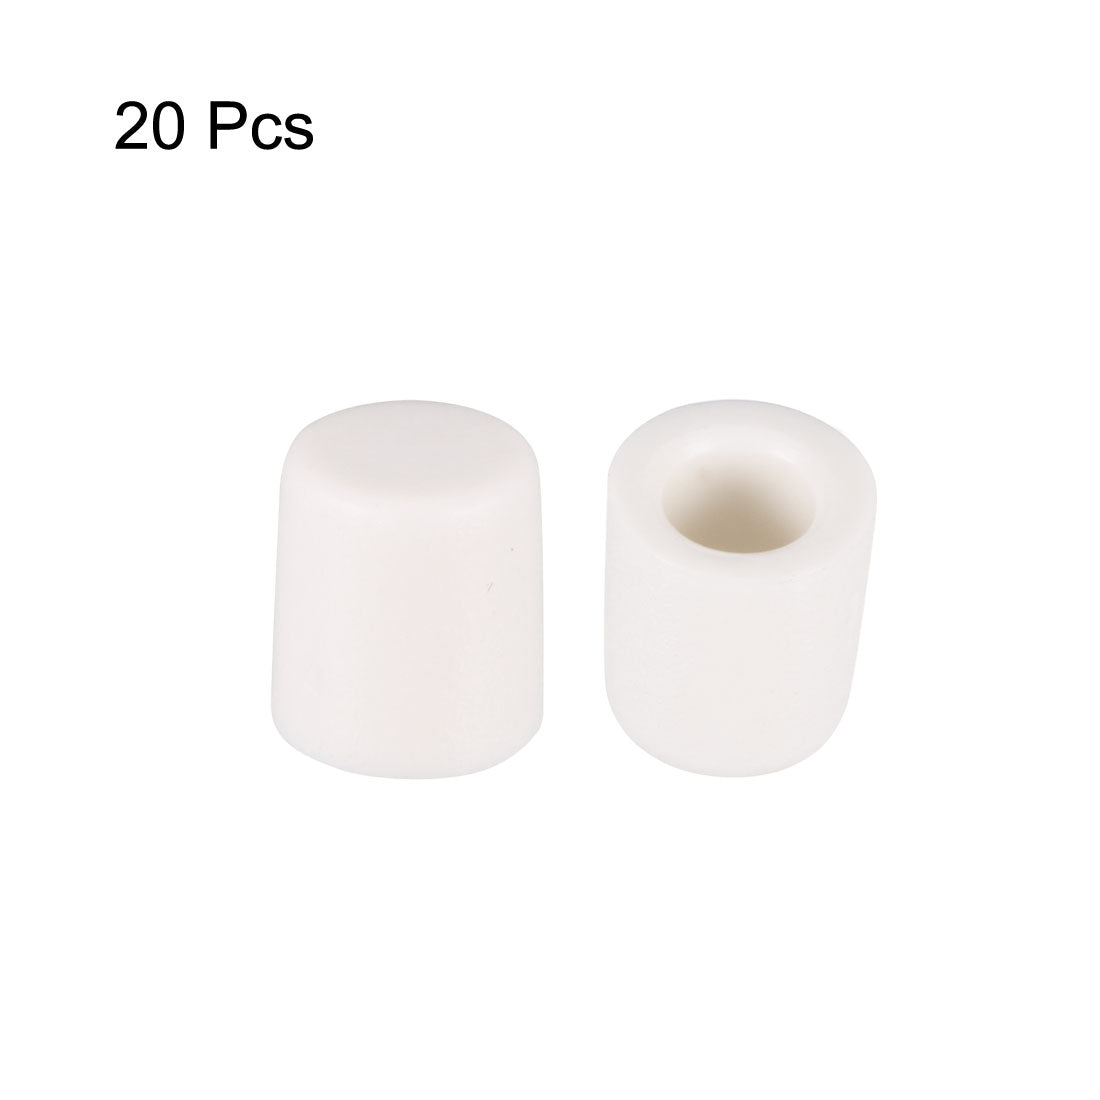 uxcell Uxcell 20Pcs 3.3mm Hole Dia Plastic Push Button Tactile Switch Caps Cover Keycaps Protector White for 6x6 Micro Switch